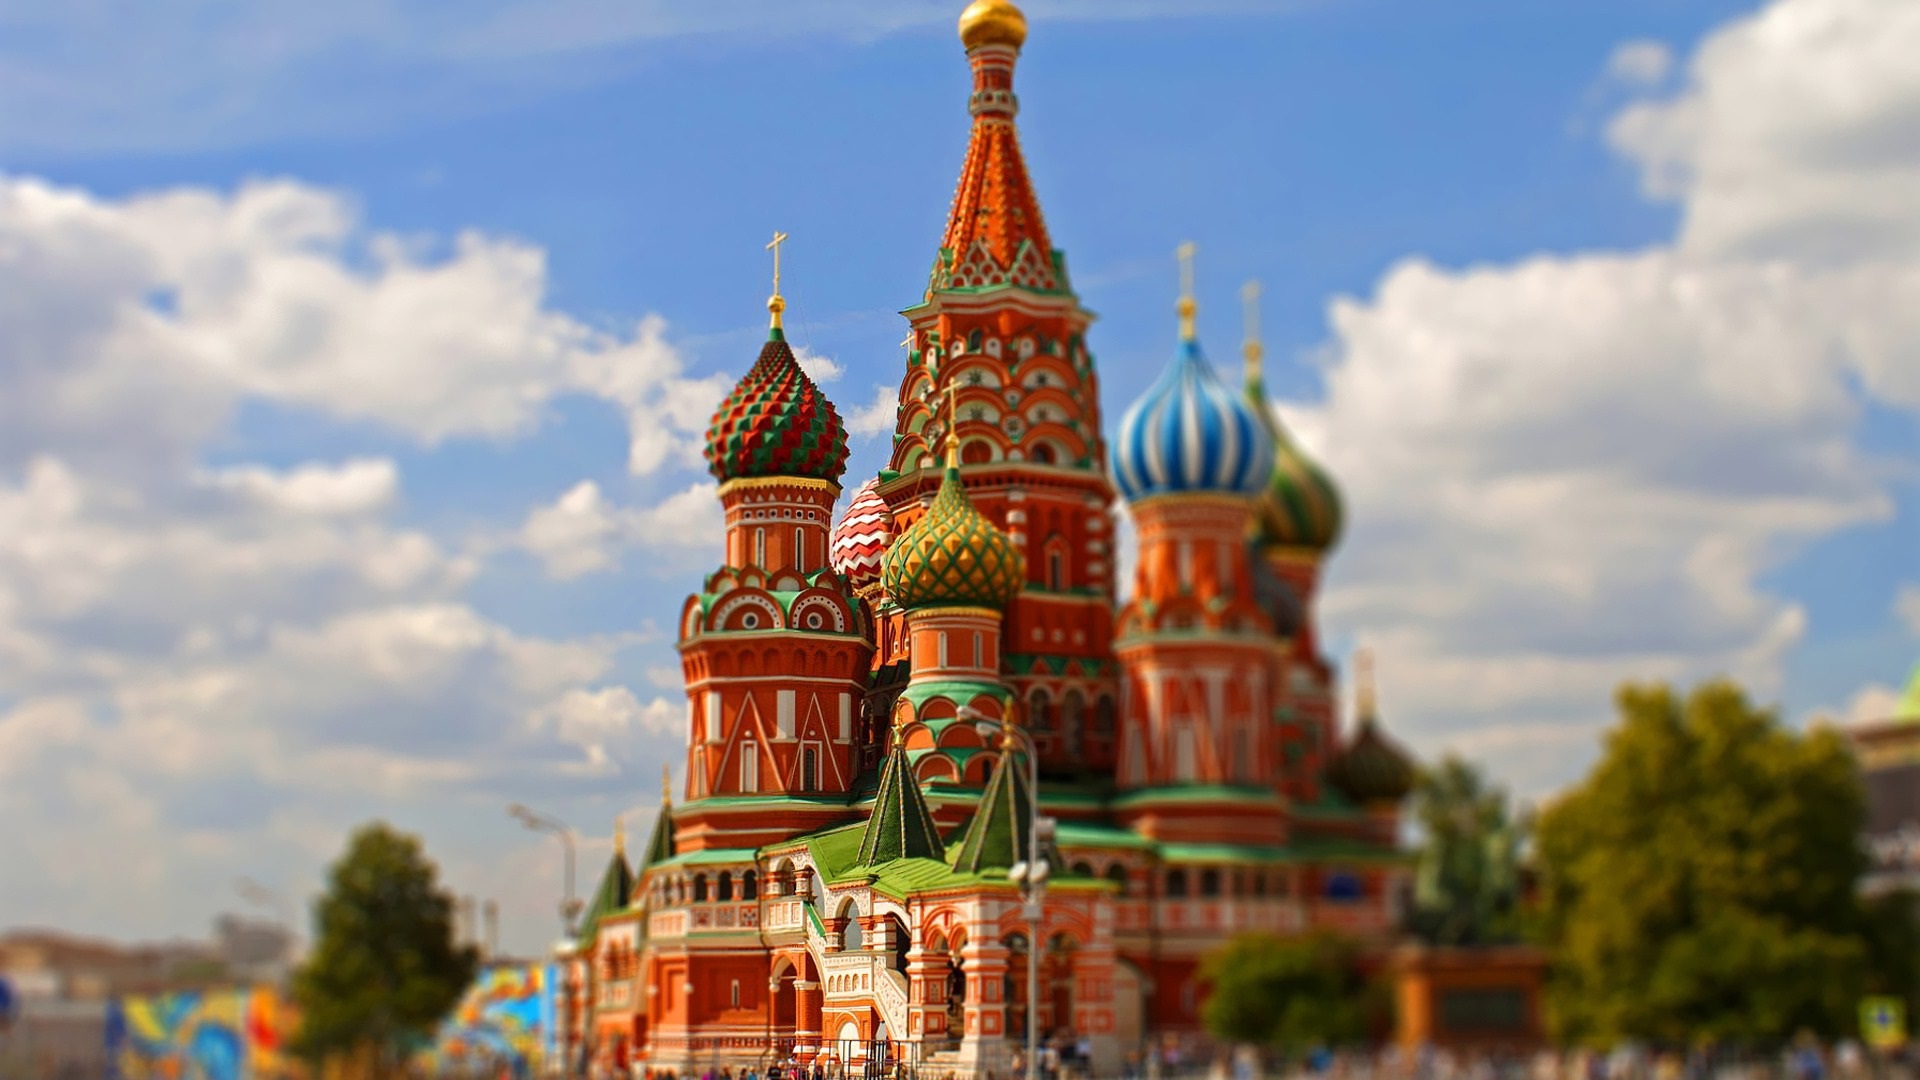 General 1920x1080 Saint Basil's Cathedral Russia architecture building tilt shift Moscow cathedral landmark